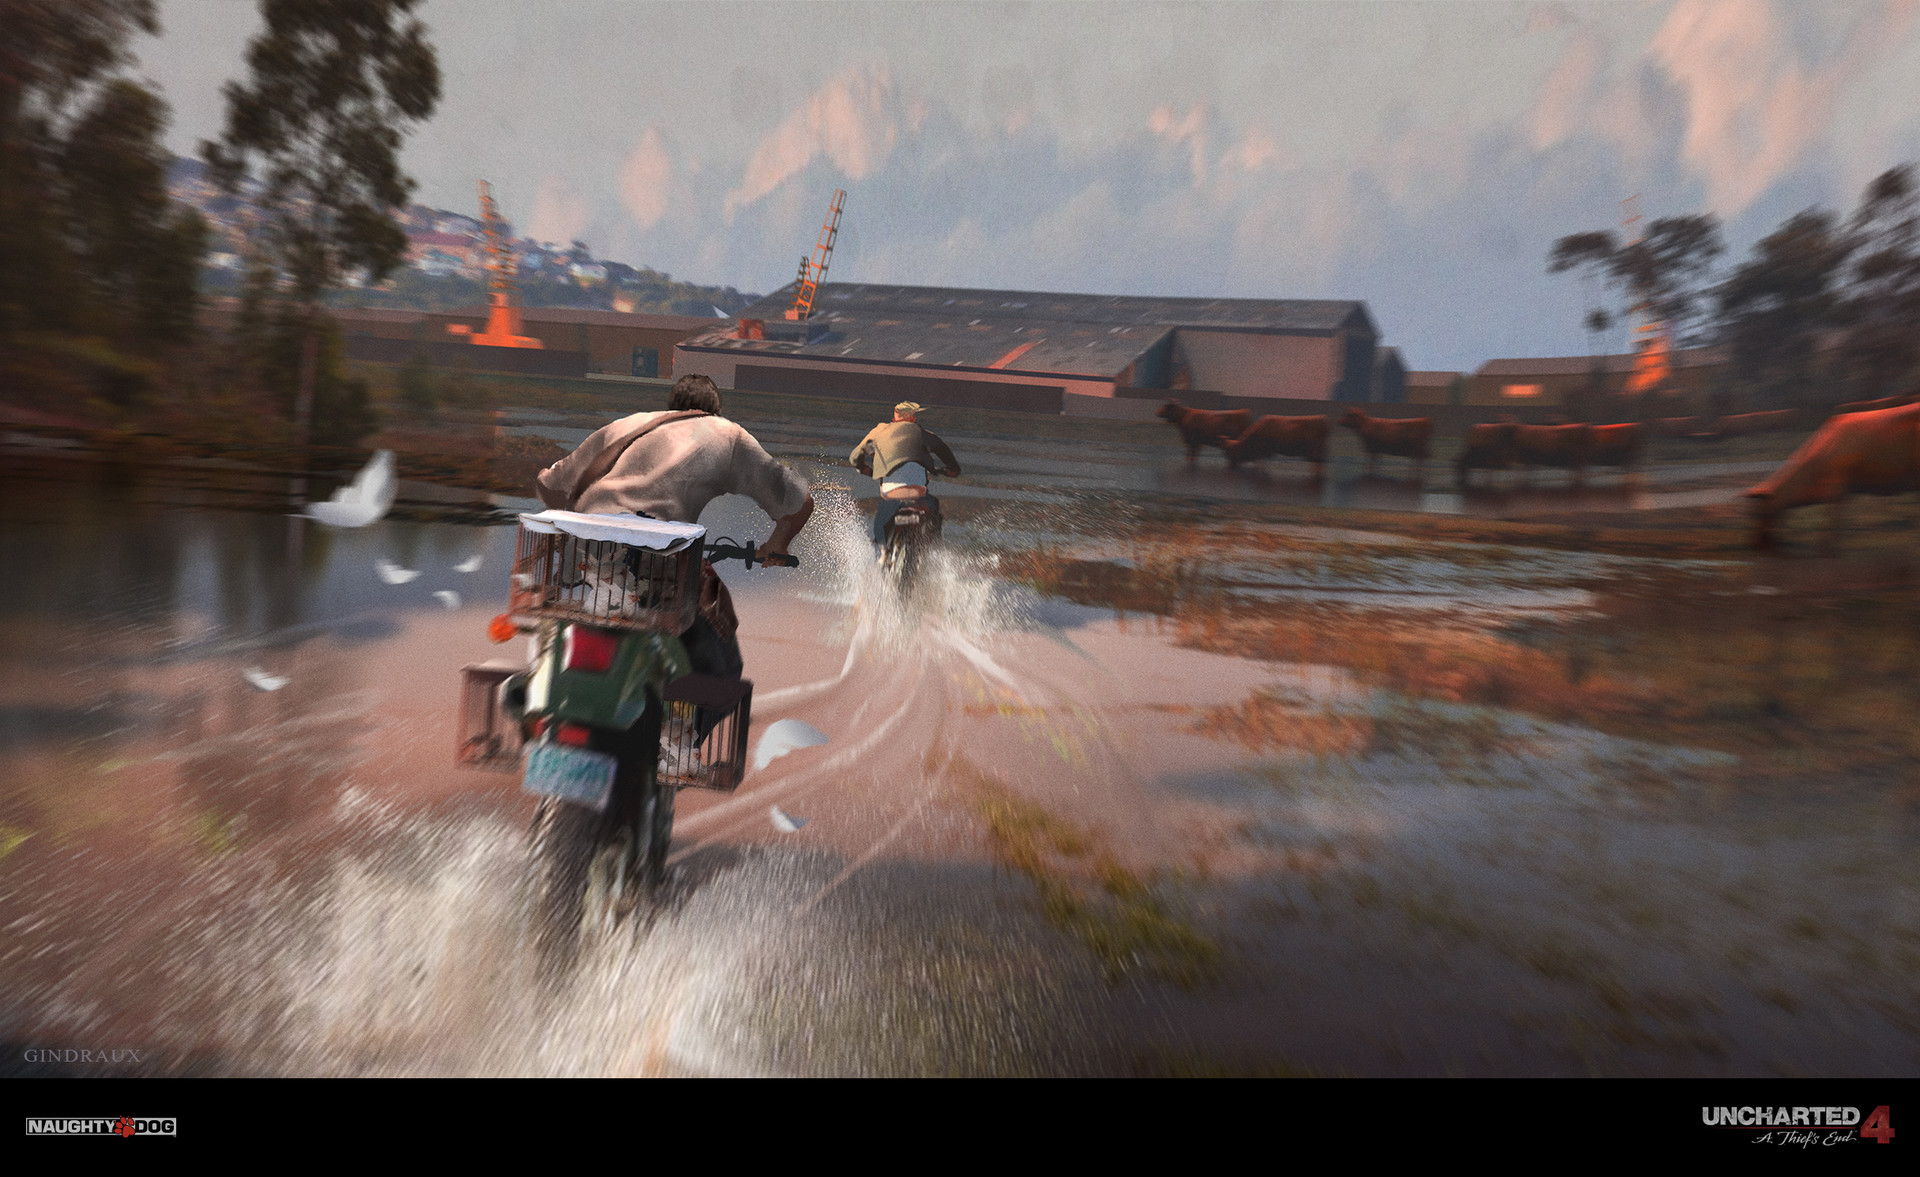 Nick Gindraux Digital Painting Concept art Uncharted 4 Motocycle Chase